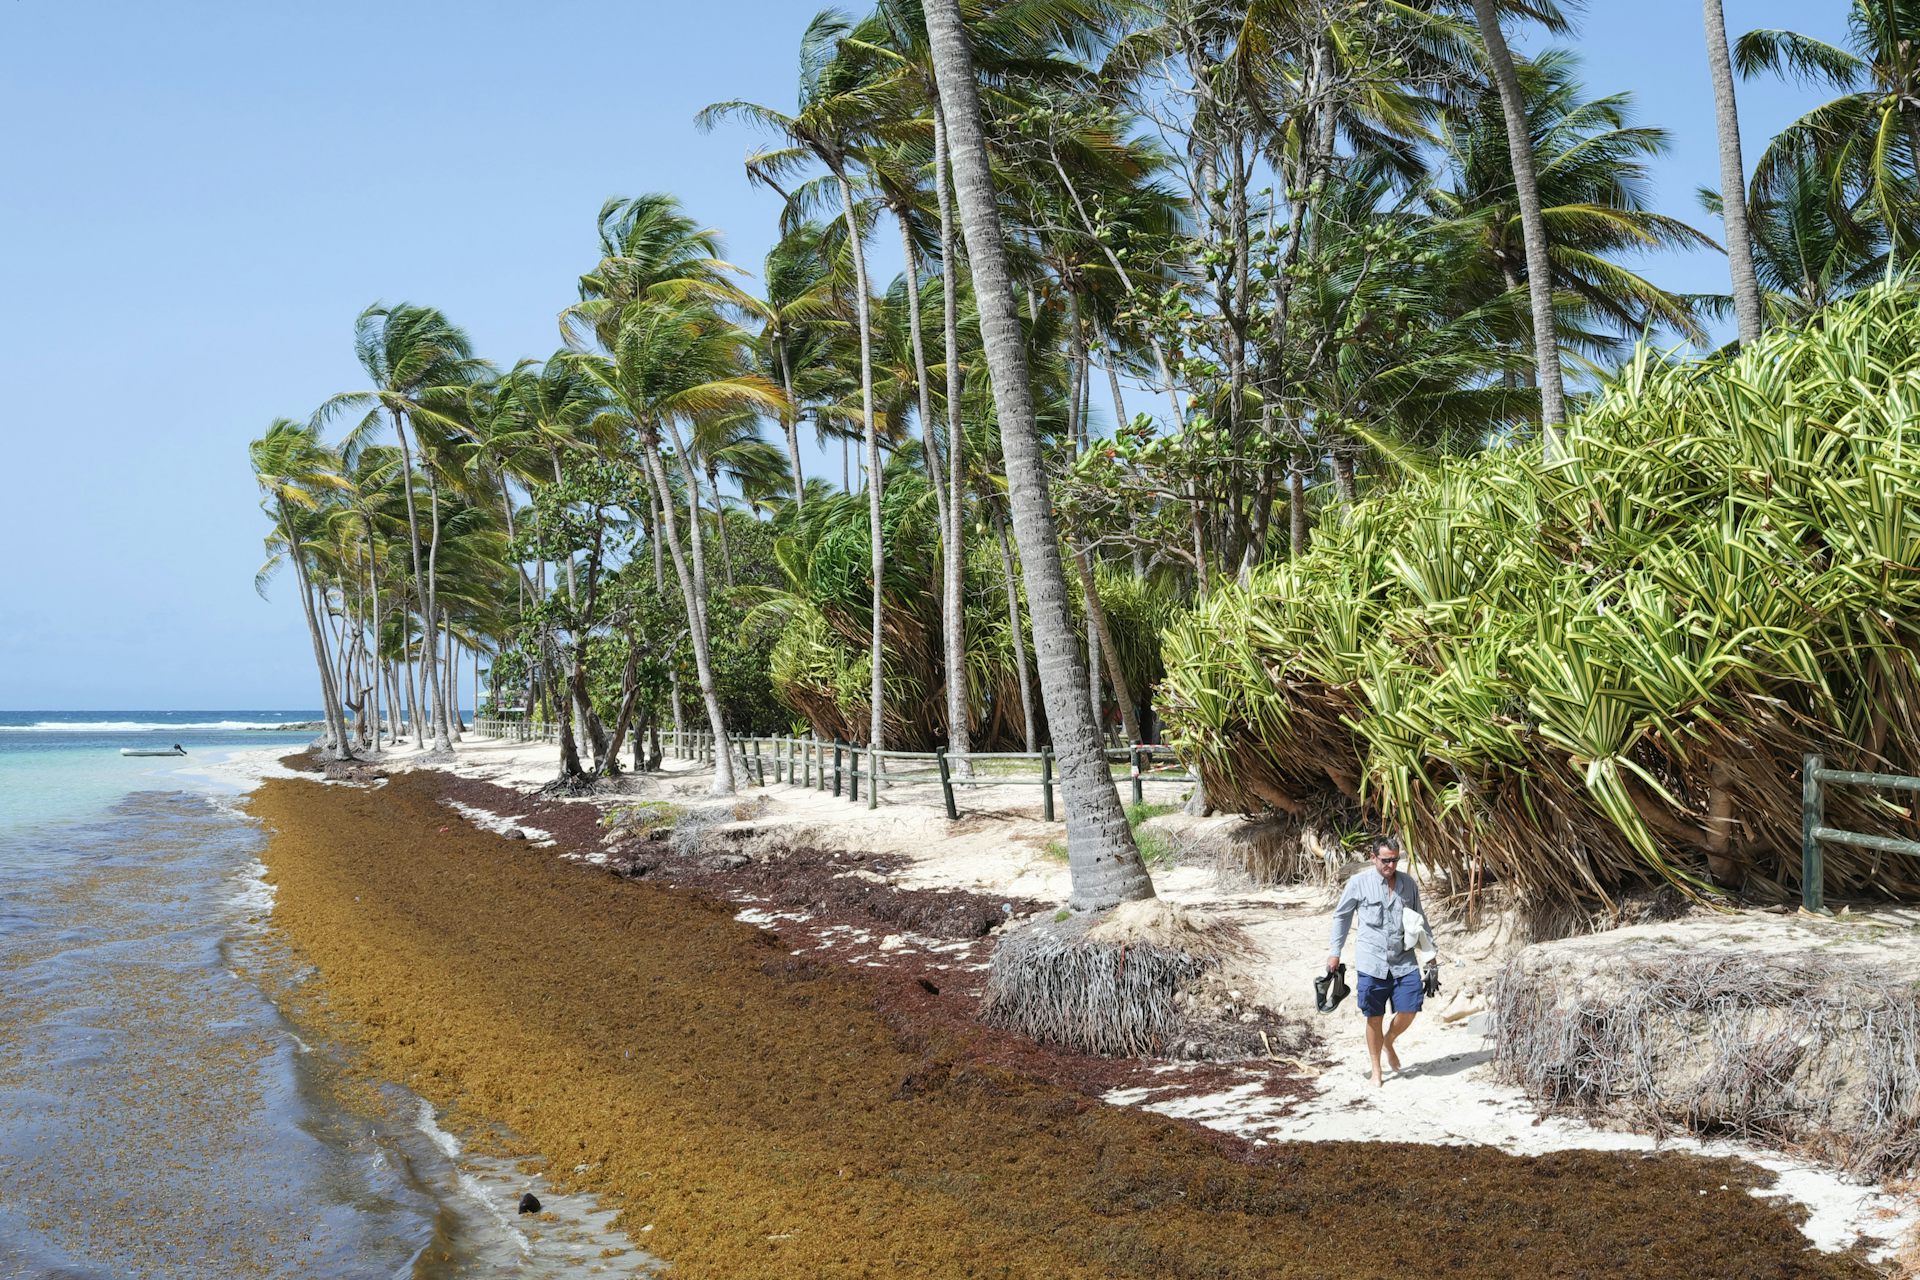 Rotting sargassum is choking the Caribbean’s white sand beaches, fueling an economic and public health crisis